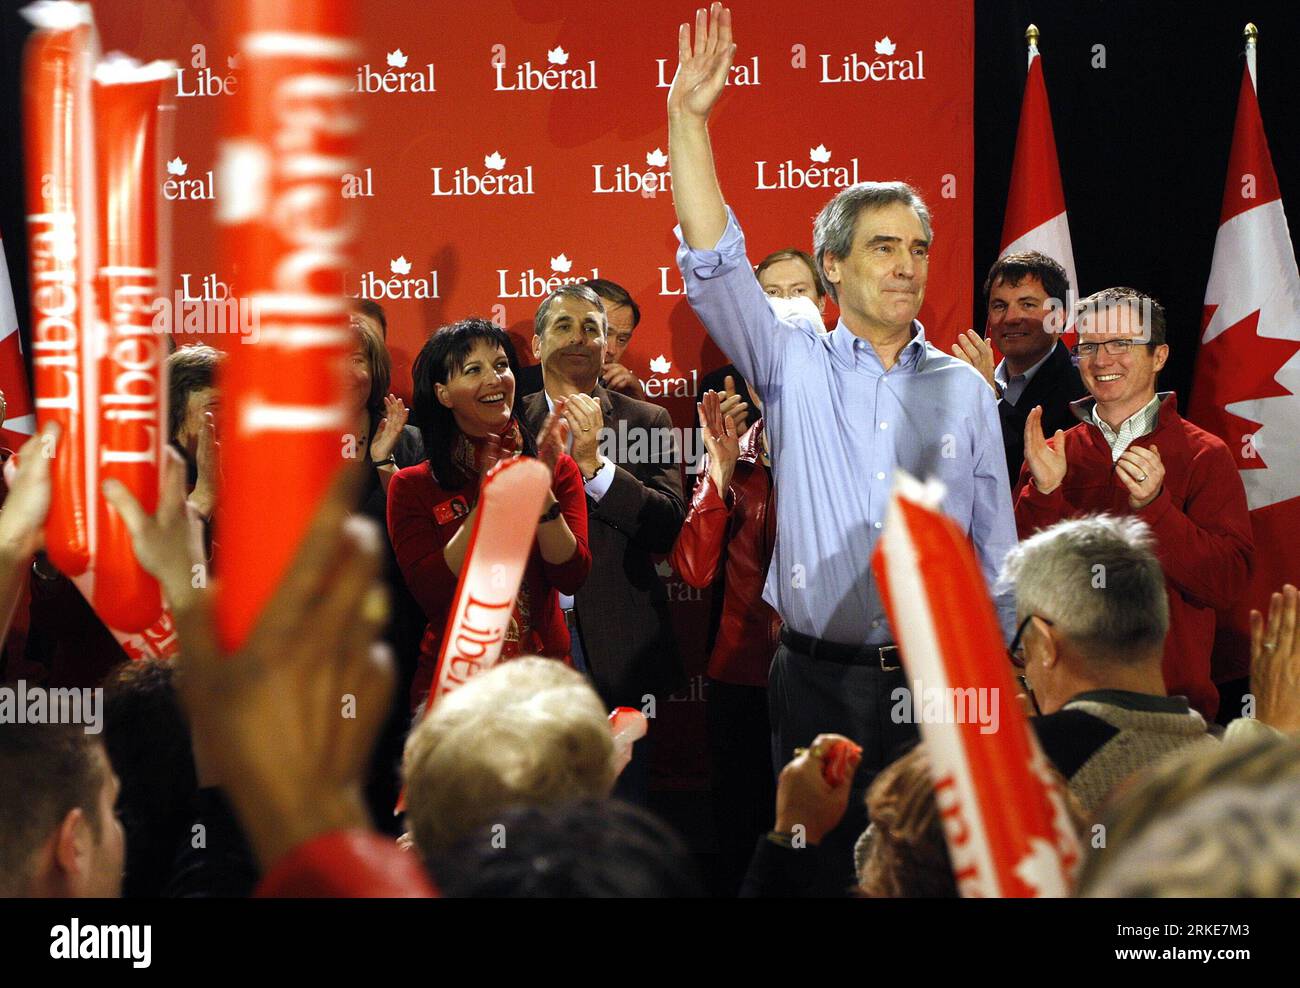 Bildnummer: 55091987  Datum: 26.03.2011  Copyright: imago/Xinhua (110327) -- OTTAWA, March 27, 2011 (Xinhua) -- Canada s Liberal Party leader Michael Ignatieff launches his campaign in Ottawa, Canada, March 26, 2011. Canada s political party leaders kicked off their campaigns for the 41st general election Saturday after the Canadian House of Commons passed a non-confidence motion defeating the Conservative government led by Prime Minister Stephen Harper for contempt of Parliament. (Xinhua/David Kawai) (lyx) CANADA-GENERAL ELECTION-PARTY LEADERS-CAMPAIGN PUBLICATIONxNOTxINxCHN People Politik Wa Stock Photo